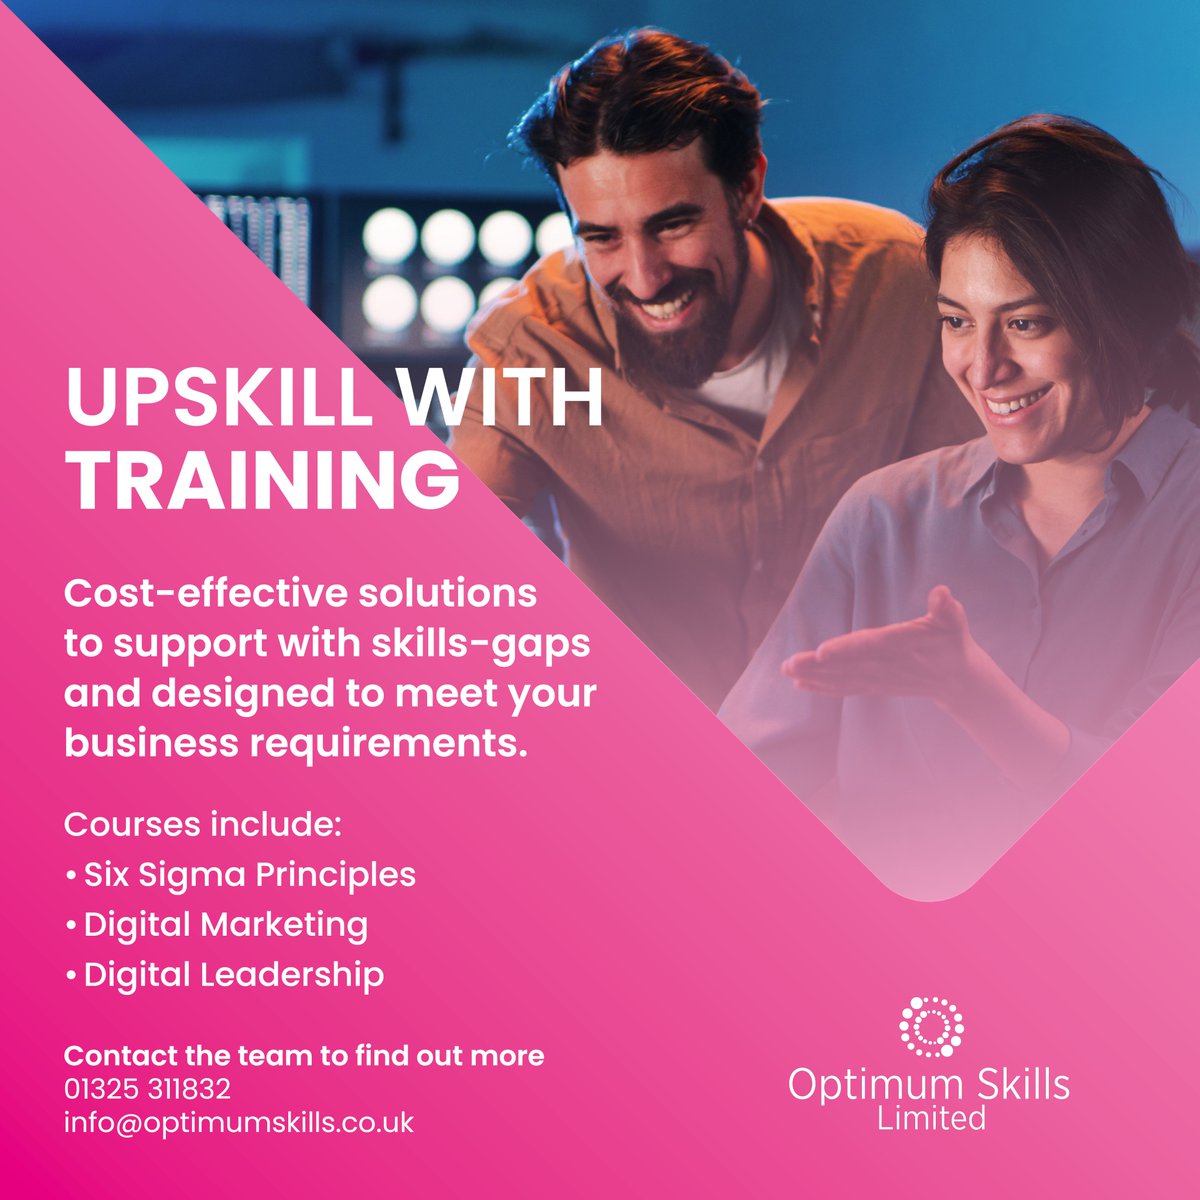 Upskill your team with training designed to meet the needs of your business 📈

Speak to the team to find out about upcoming available training.
☎️ 01325 311832
✉️ info@optimumskills.co.uk

#Upskill #Training #EmployeeDevelopment #SkillsForLife